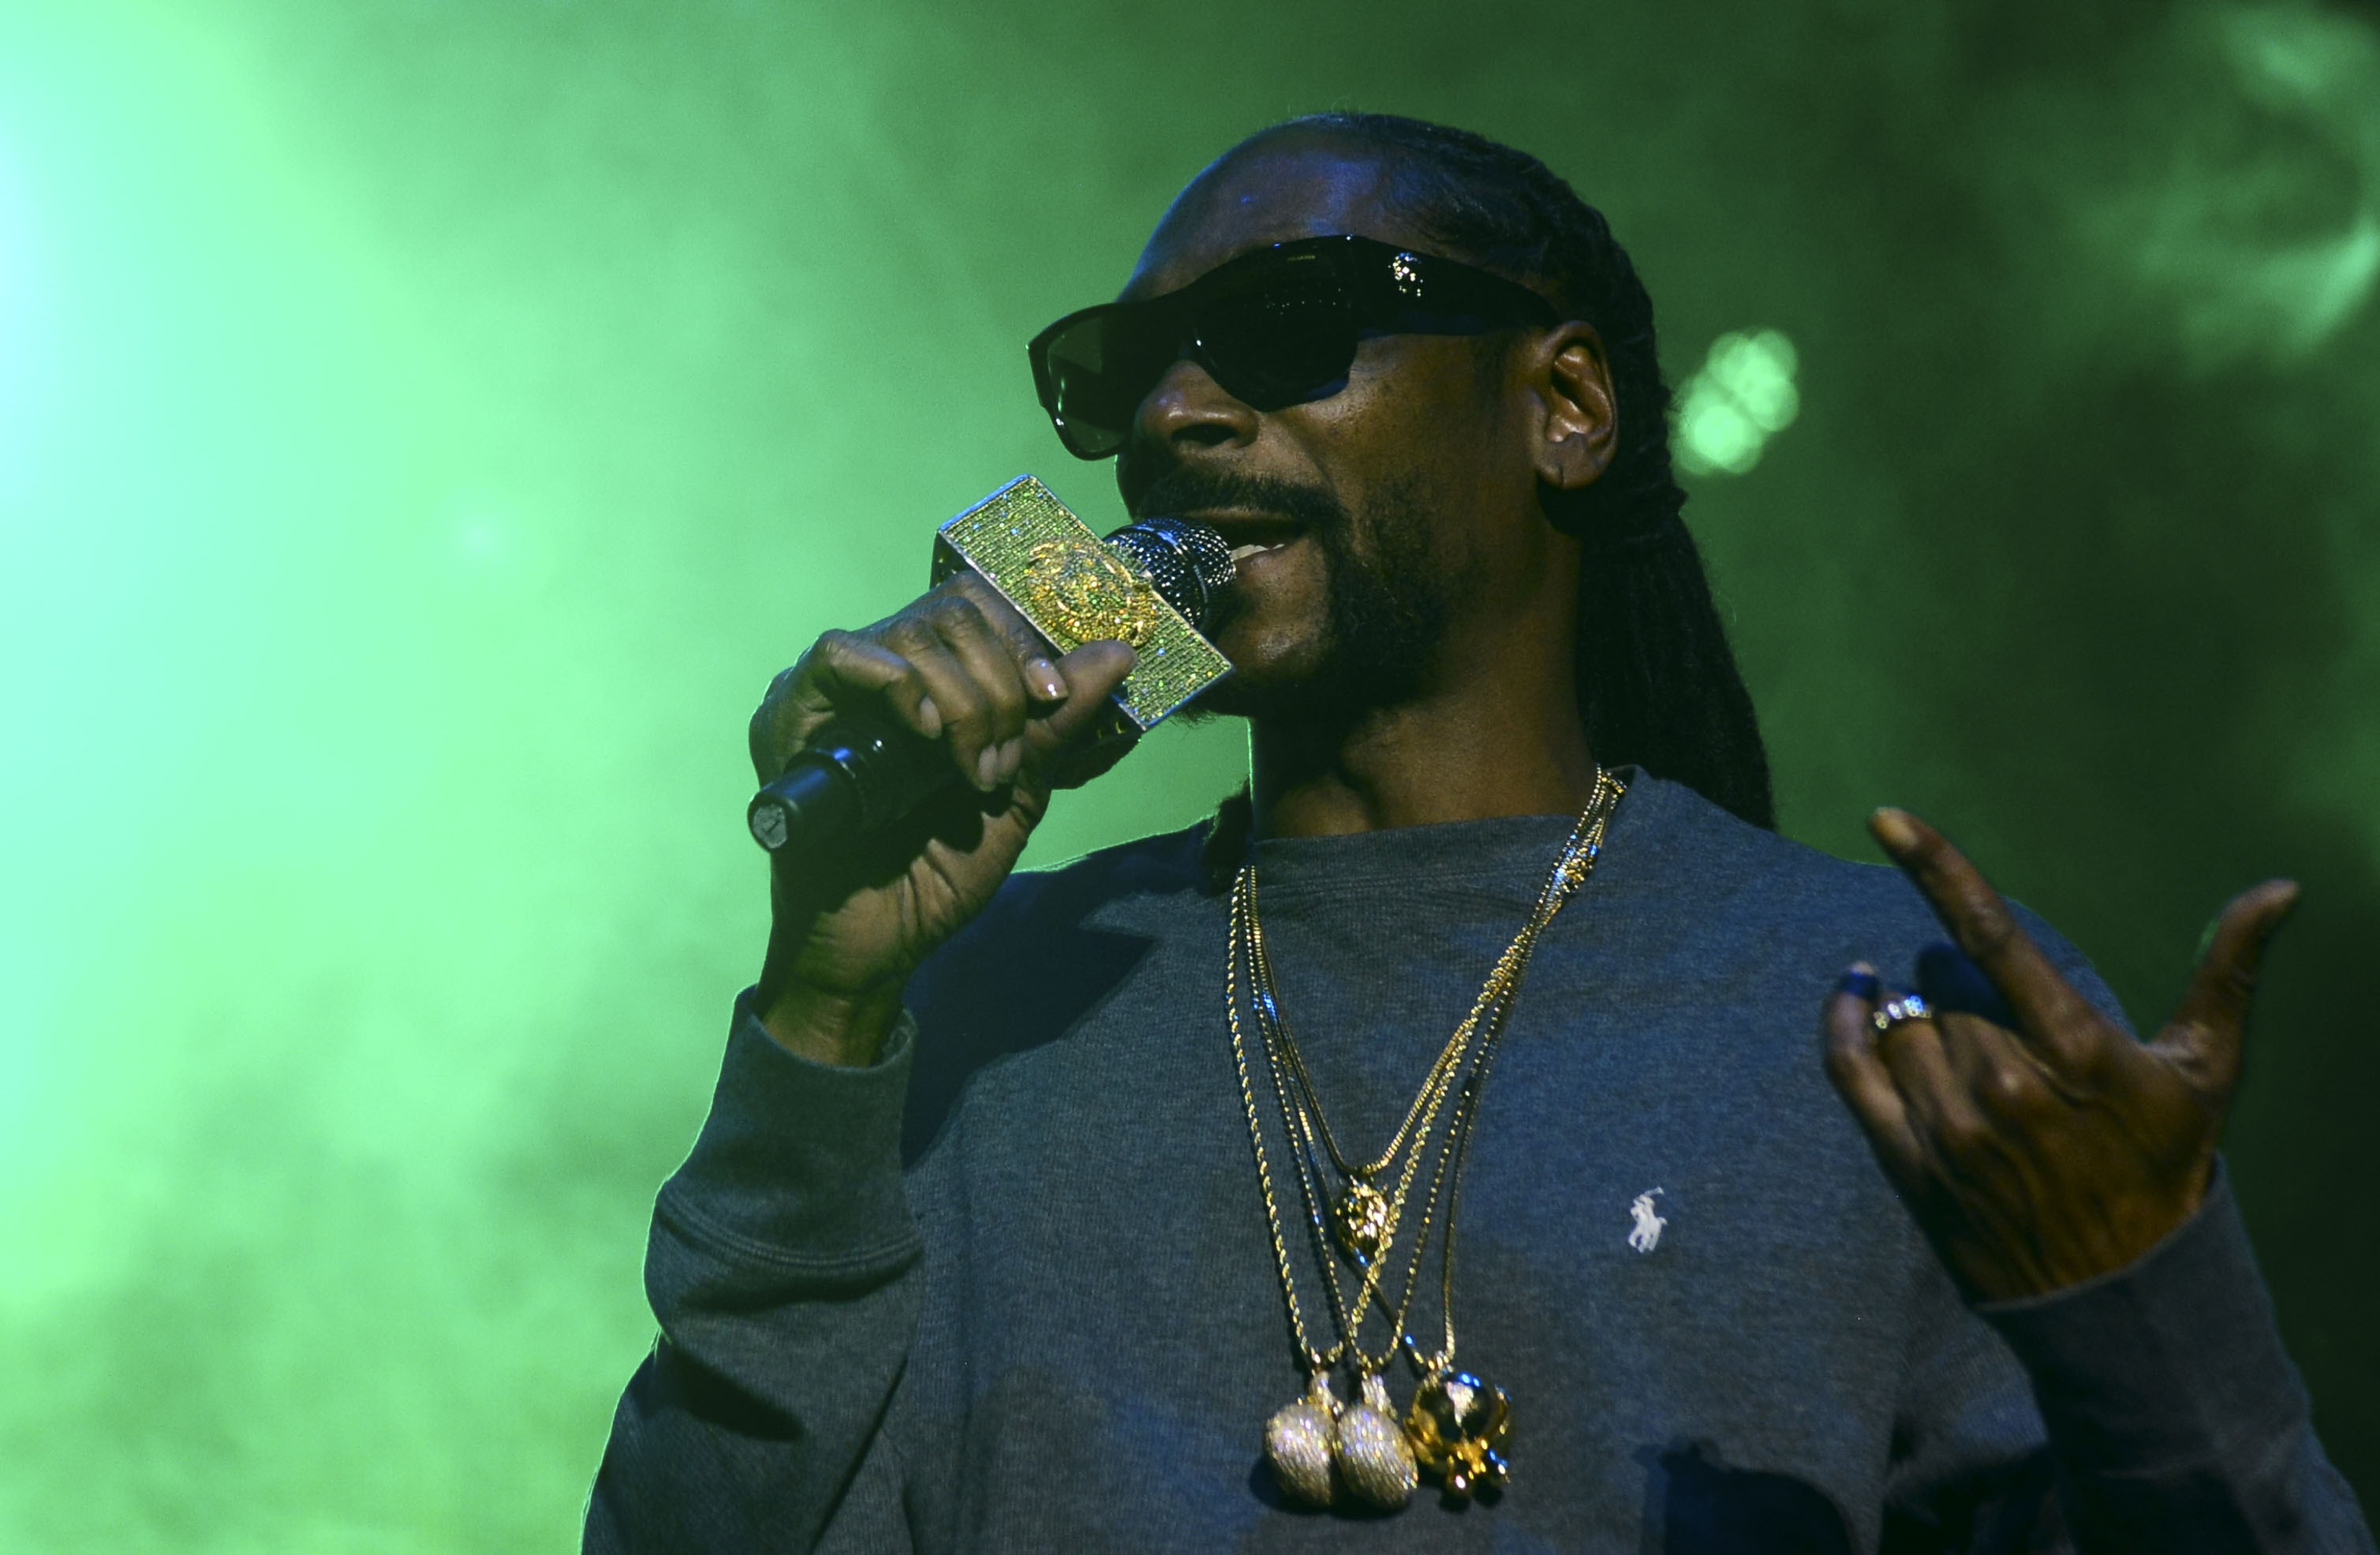 COLOMBIA-MUSIC-SNOOP DOGG